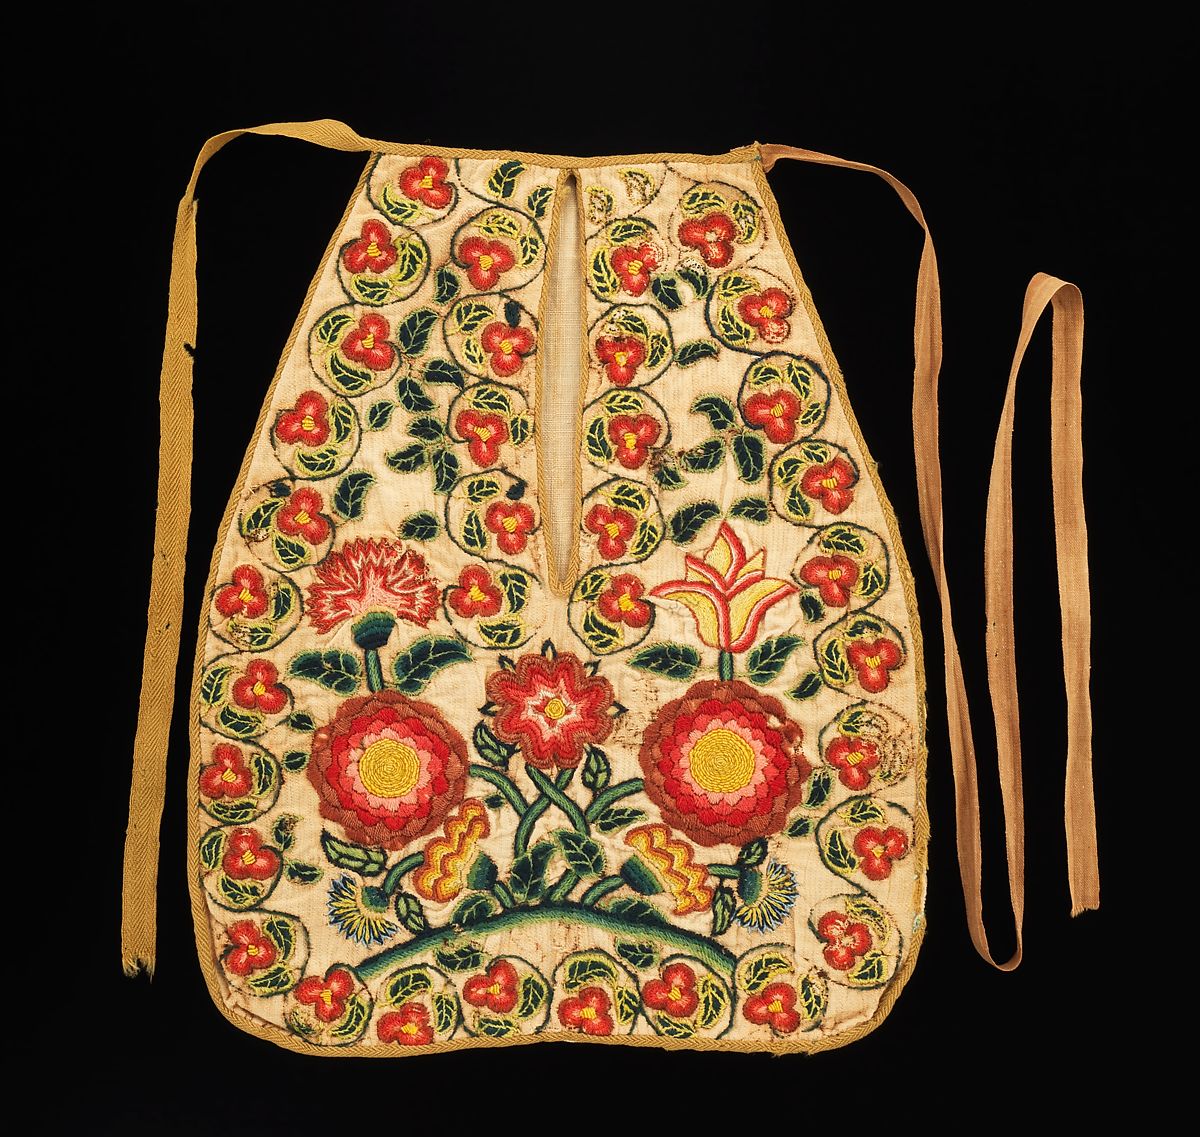 Pocket, ca. 1784 {The Met Open Access Collection}